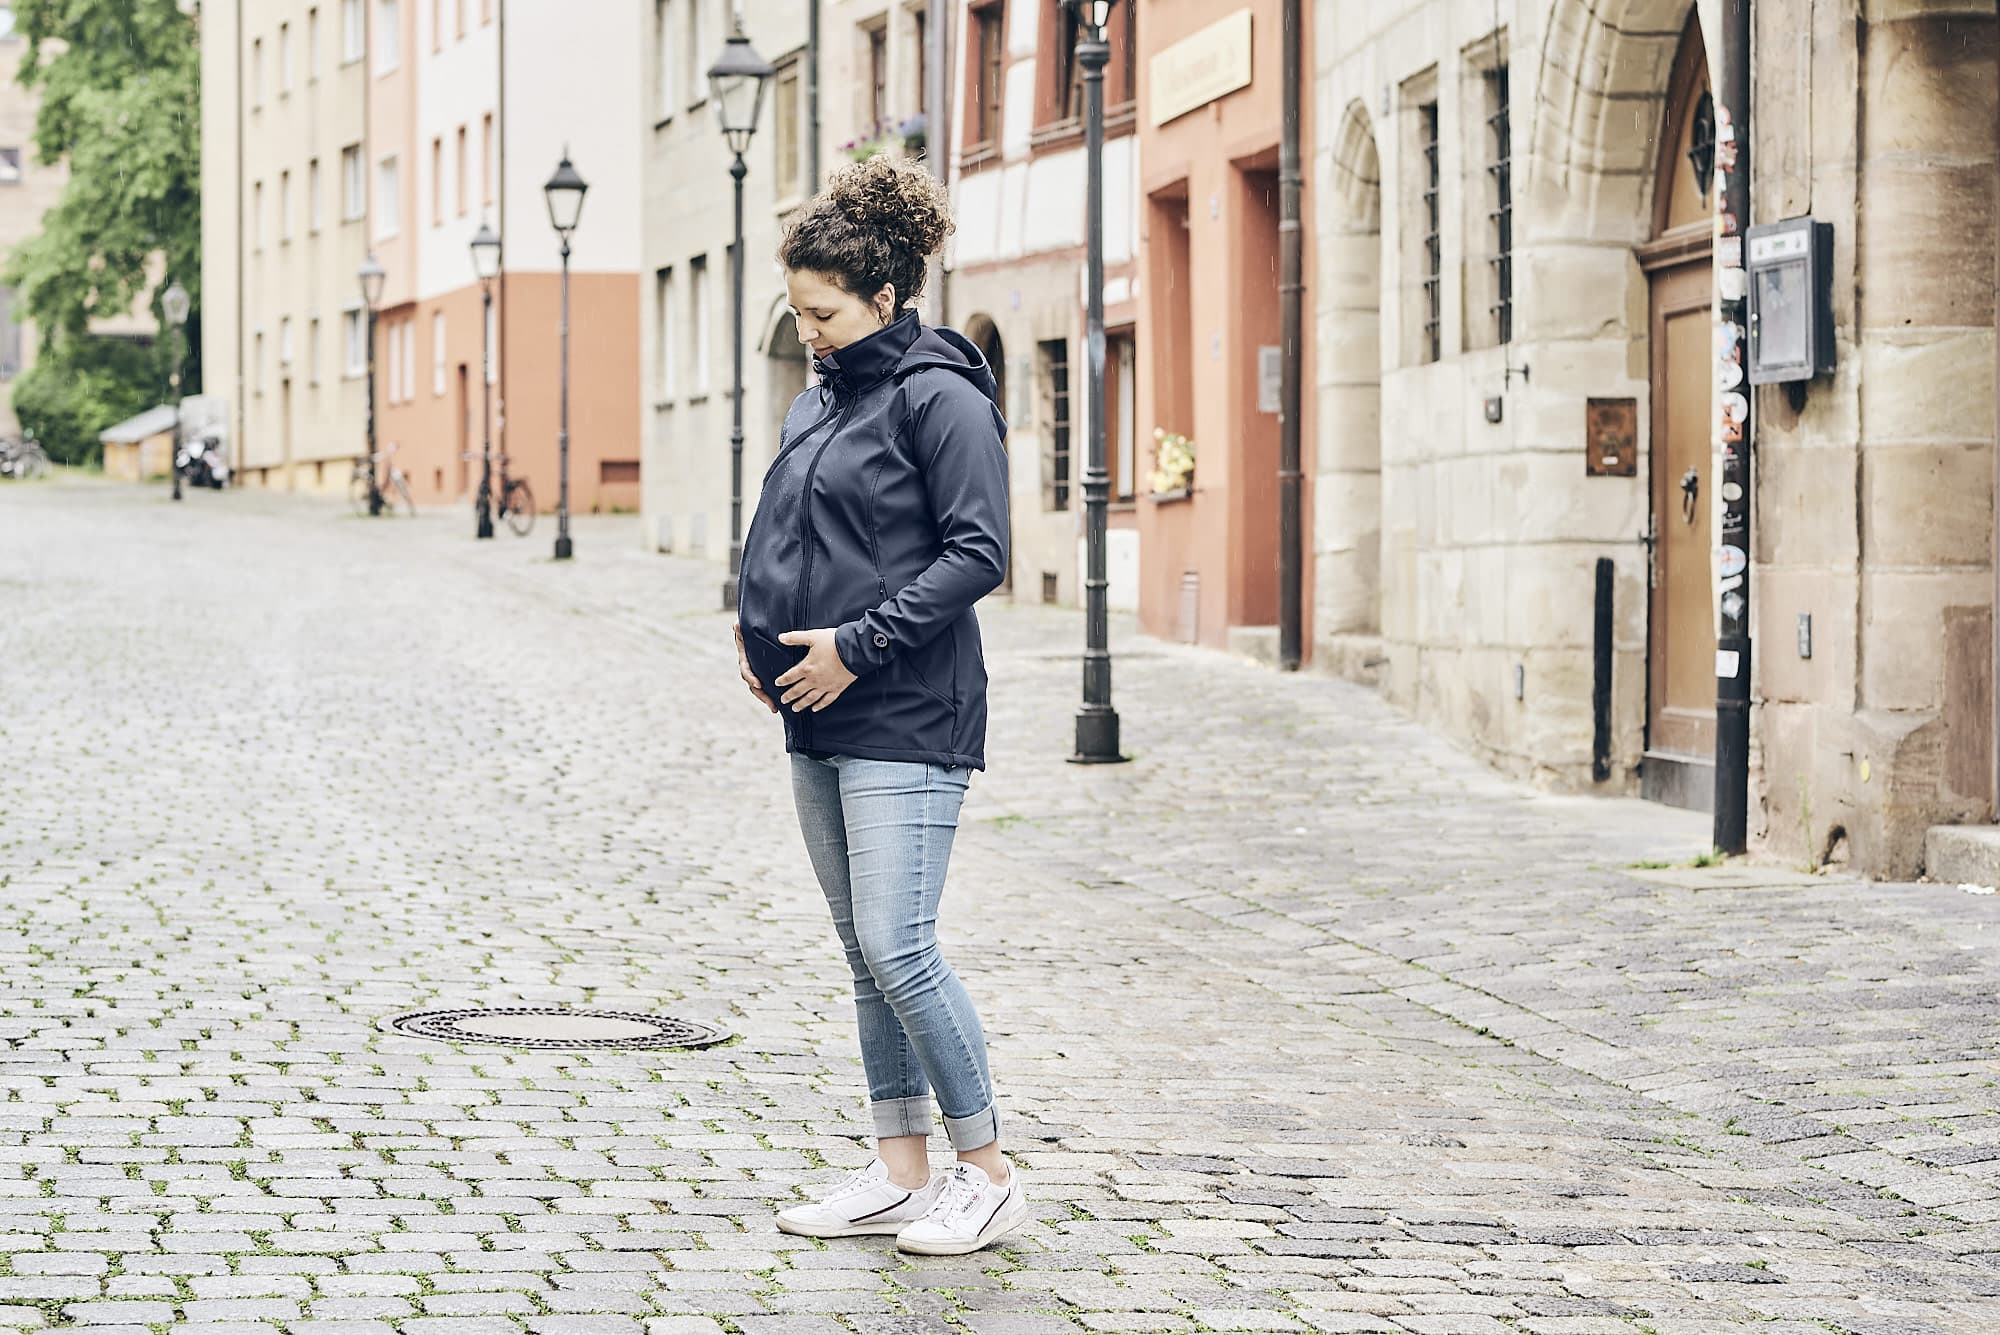 A woman with brown curly hair done up in a bun standing in the middle of a cobbled street looking down lovingly at her pregnancy bump whilst wearing the Mamalila Babywearing jacket with the maternity insert added.